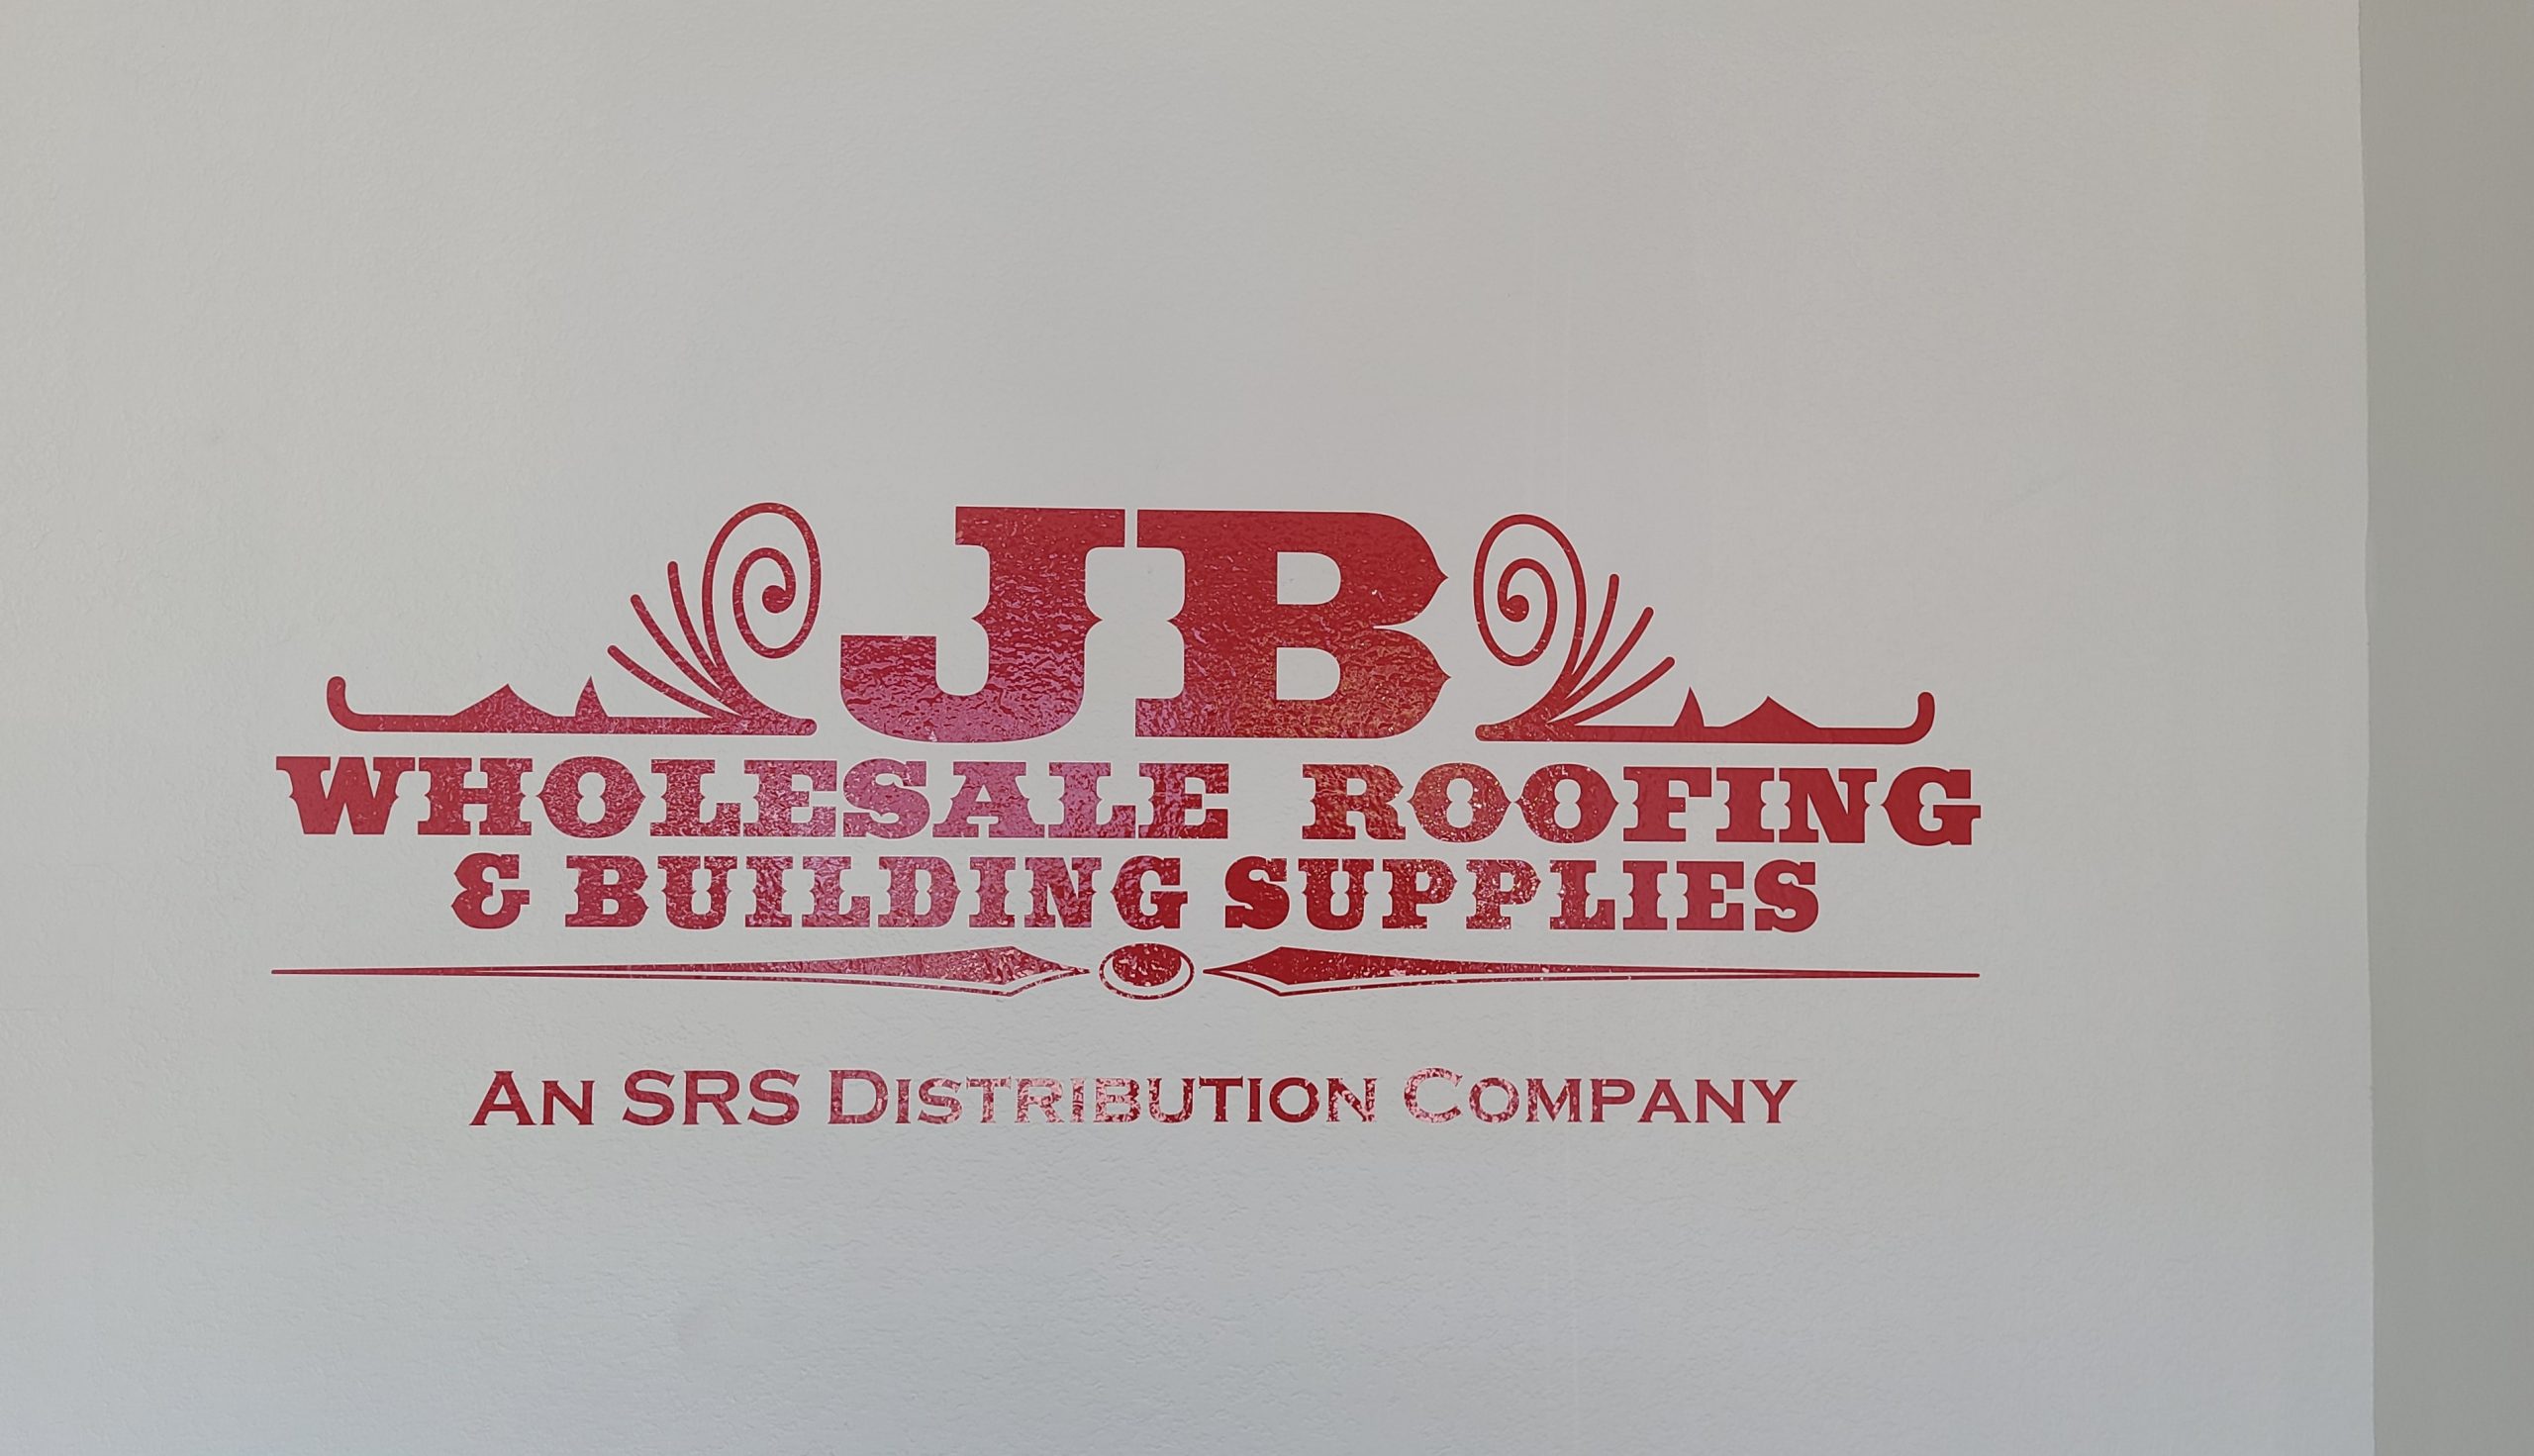 More from our extensive package for JB Wholesale, this time it's an interior sign for their Santa Fe office.